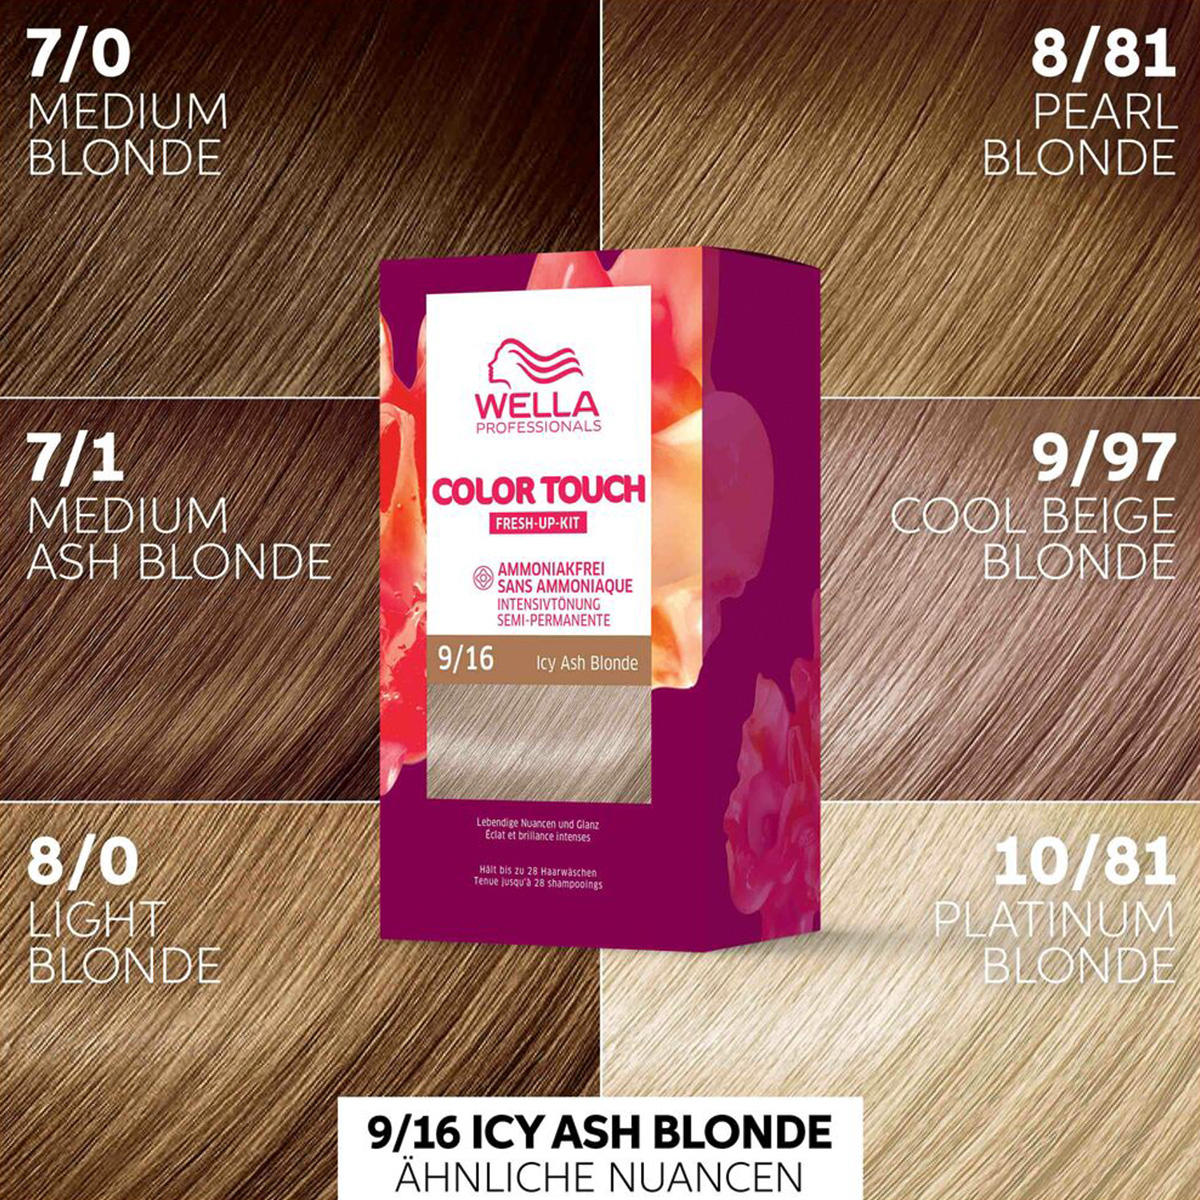 Wella Color Touch Fresh-Up-Kit 9/16 Icy Ash Blonde - 3